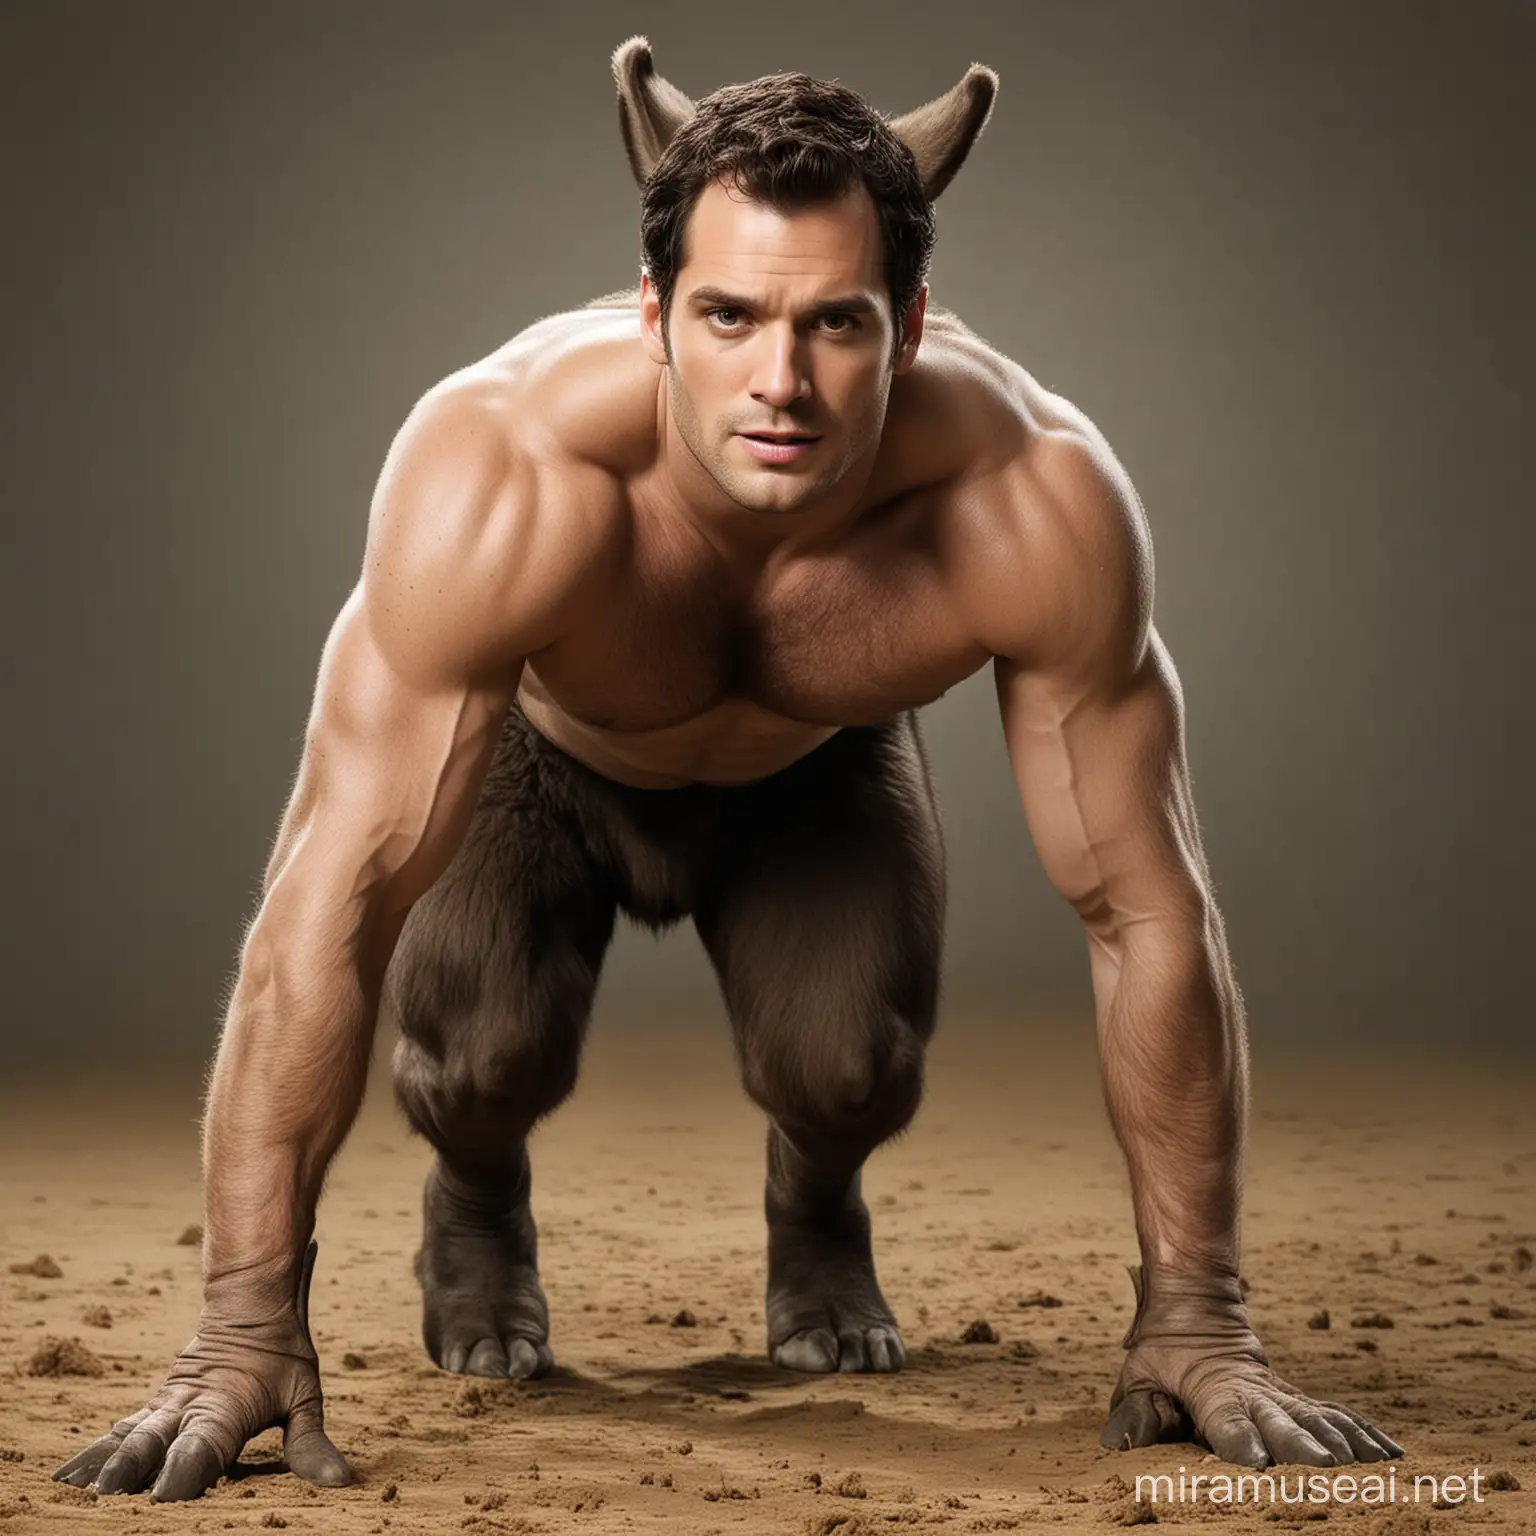 Henry Cavill on all fours transforming into a donkey. He has donkey ears. He has donkey legs. He has donkey hooves. He has a donkey tail. He has a complete donkey body and braying like a donkey. But his head is human.